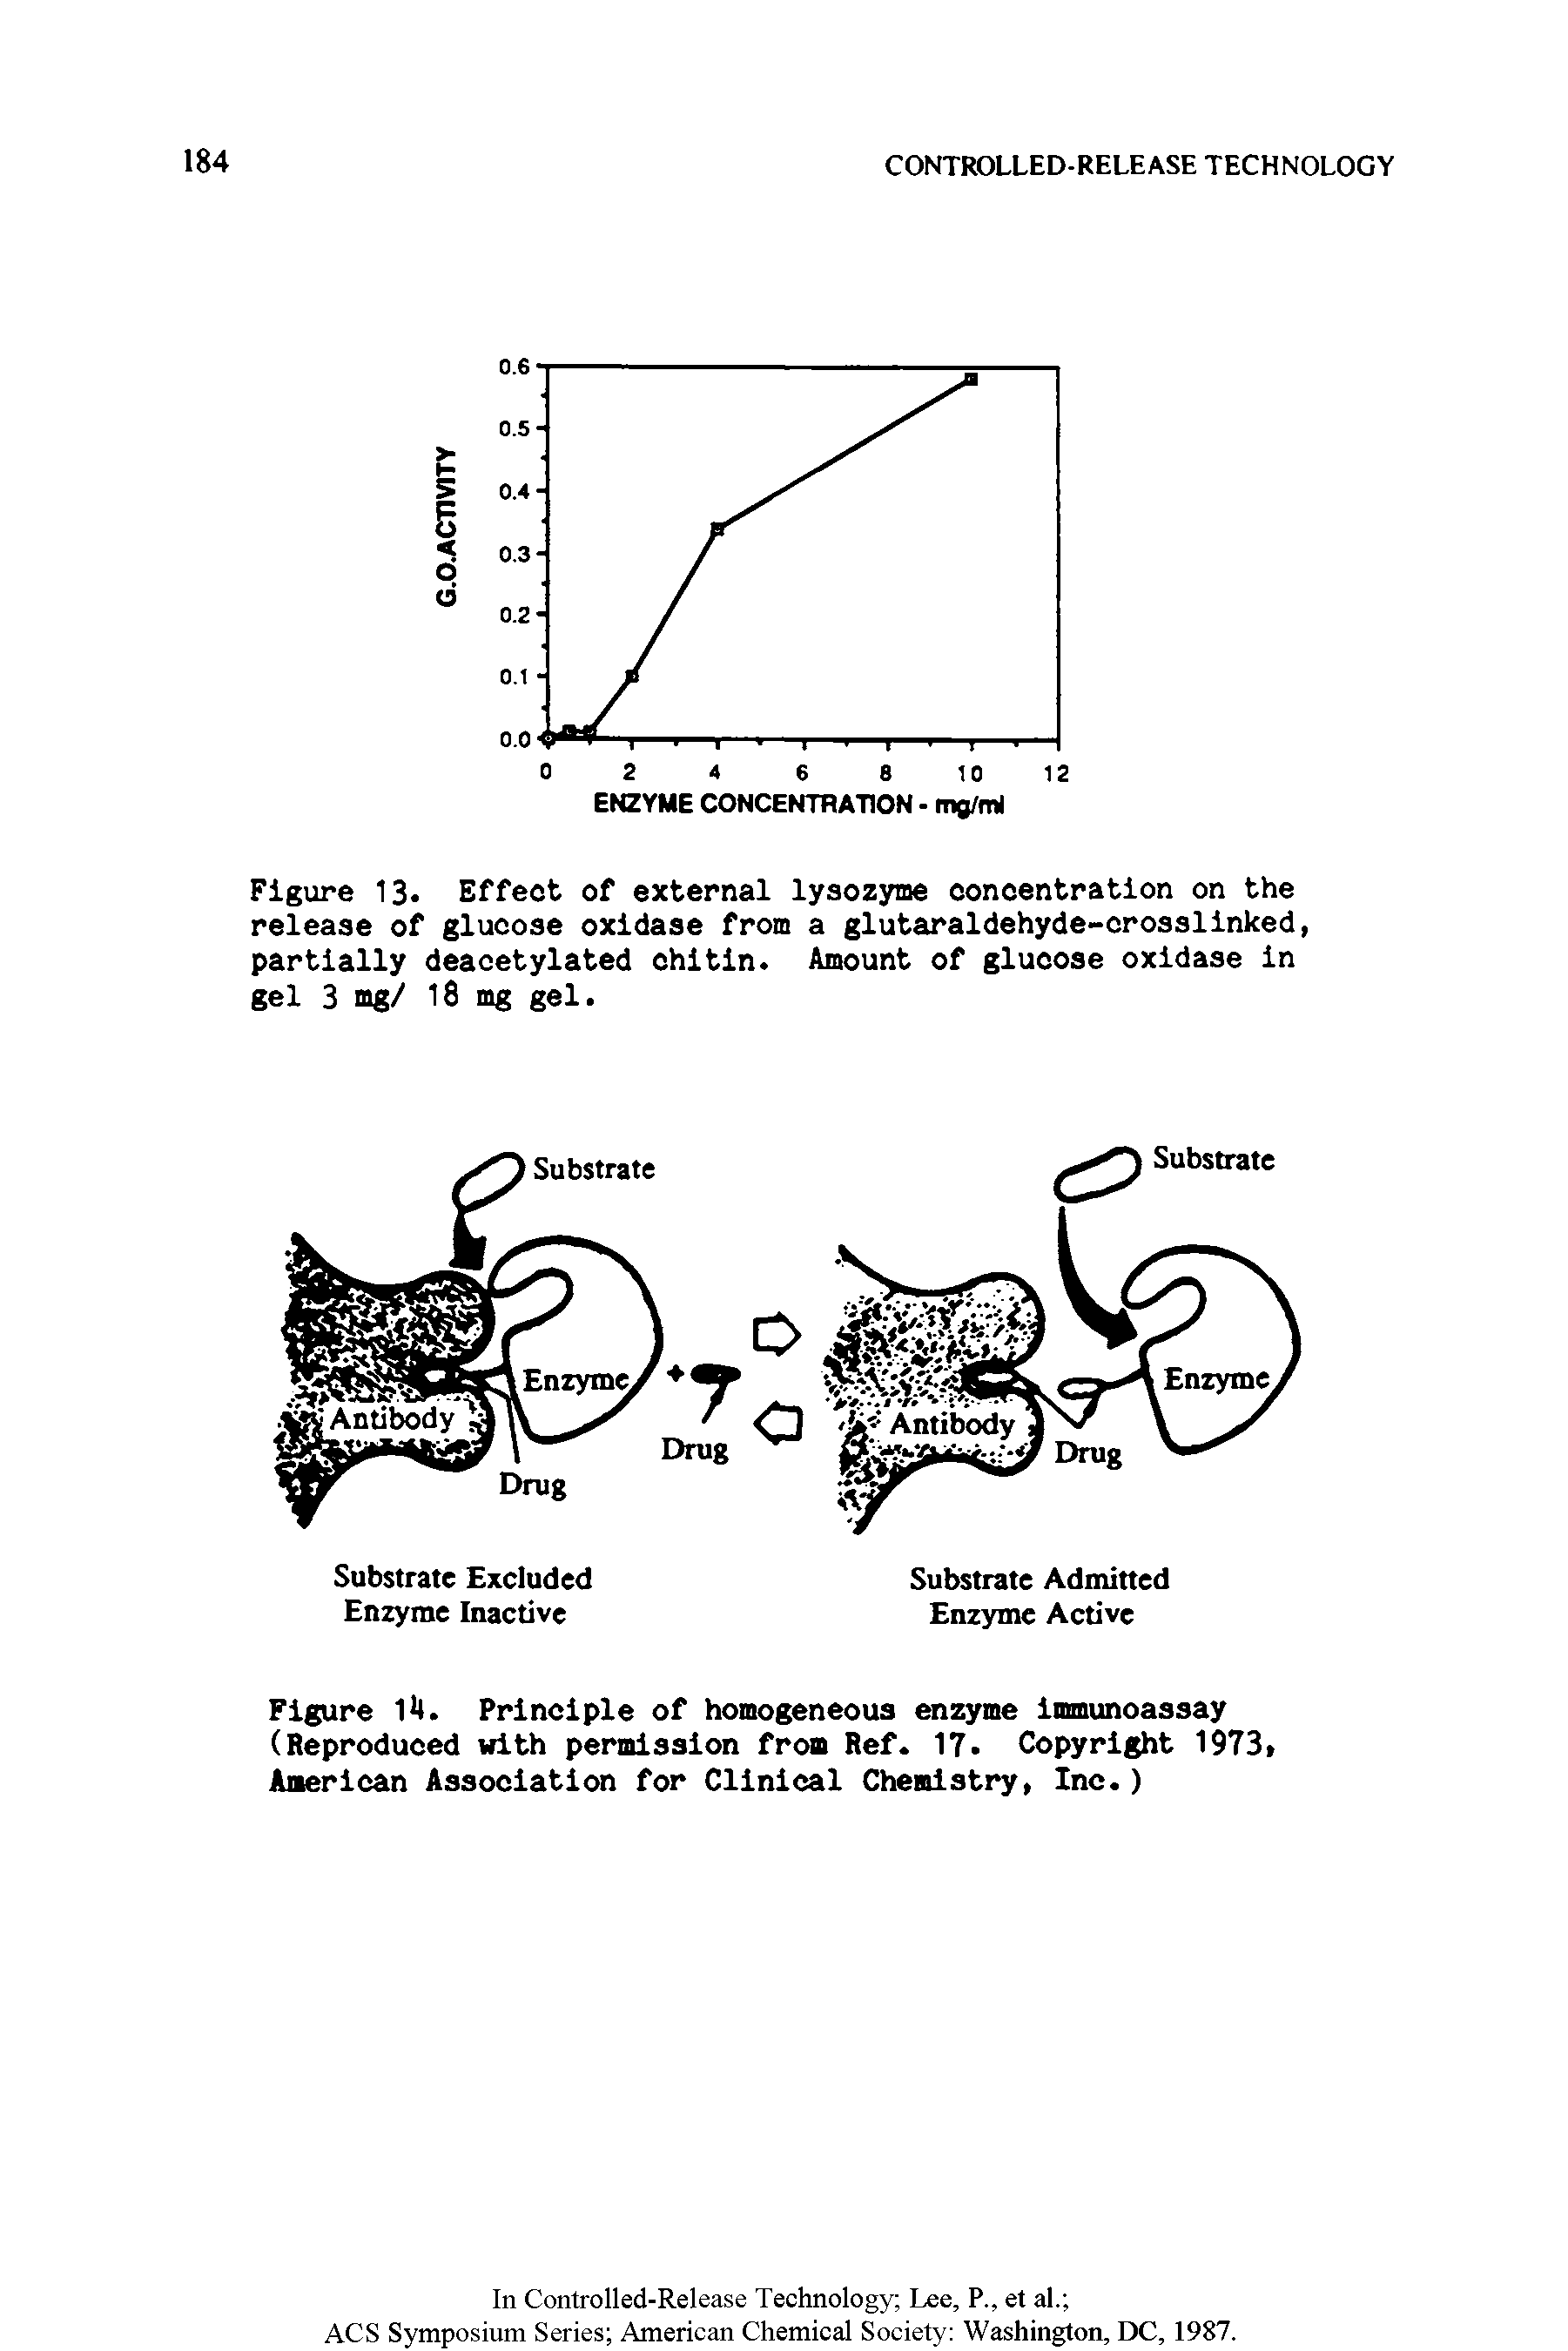 Figure 14. Principle of homogeneous enzyme immunoassay (Reproduced with permission from Ref. 17. Copyright 1973 American Association for Clinical Chemistry, Inc.)...